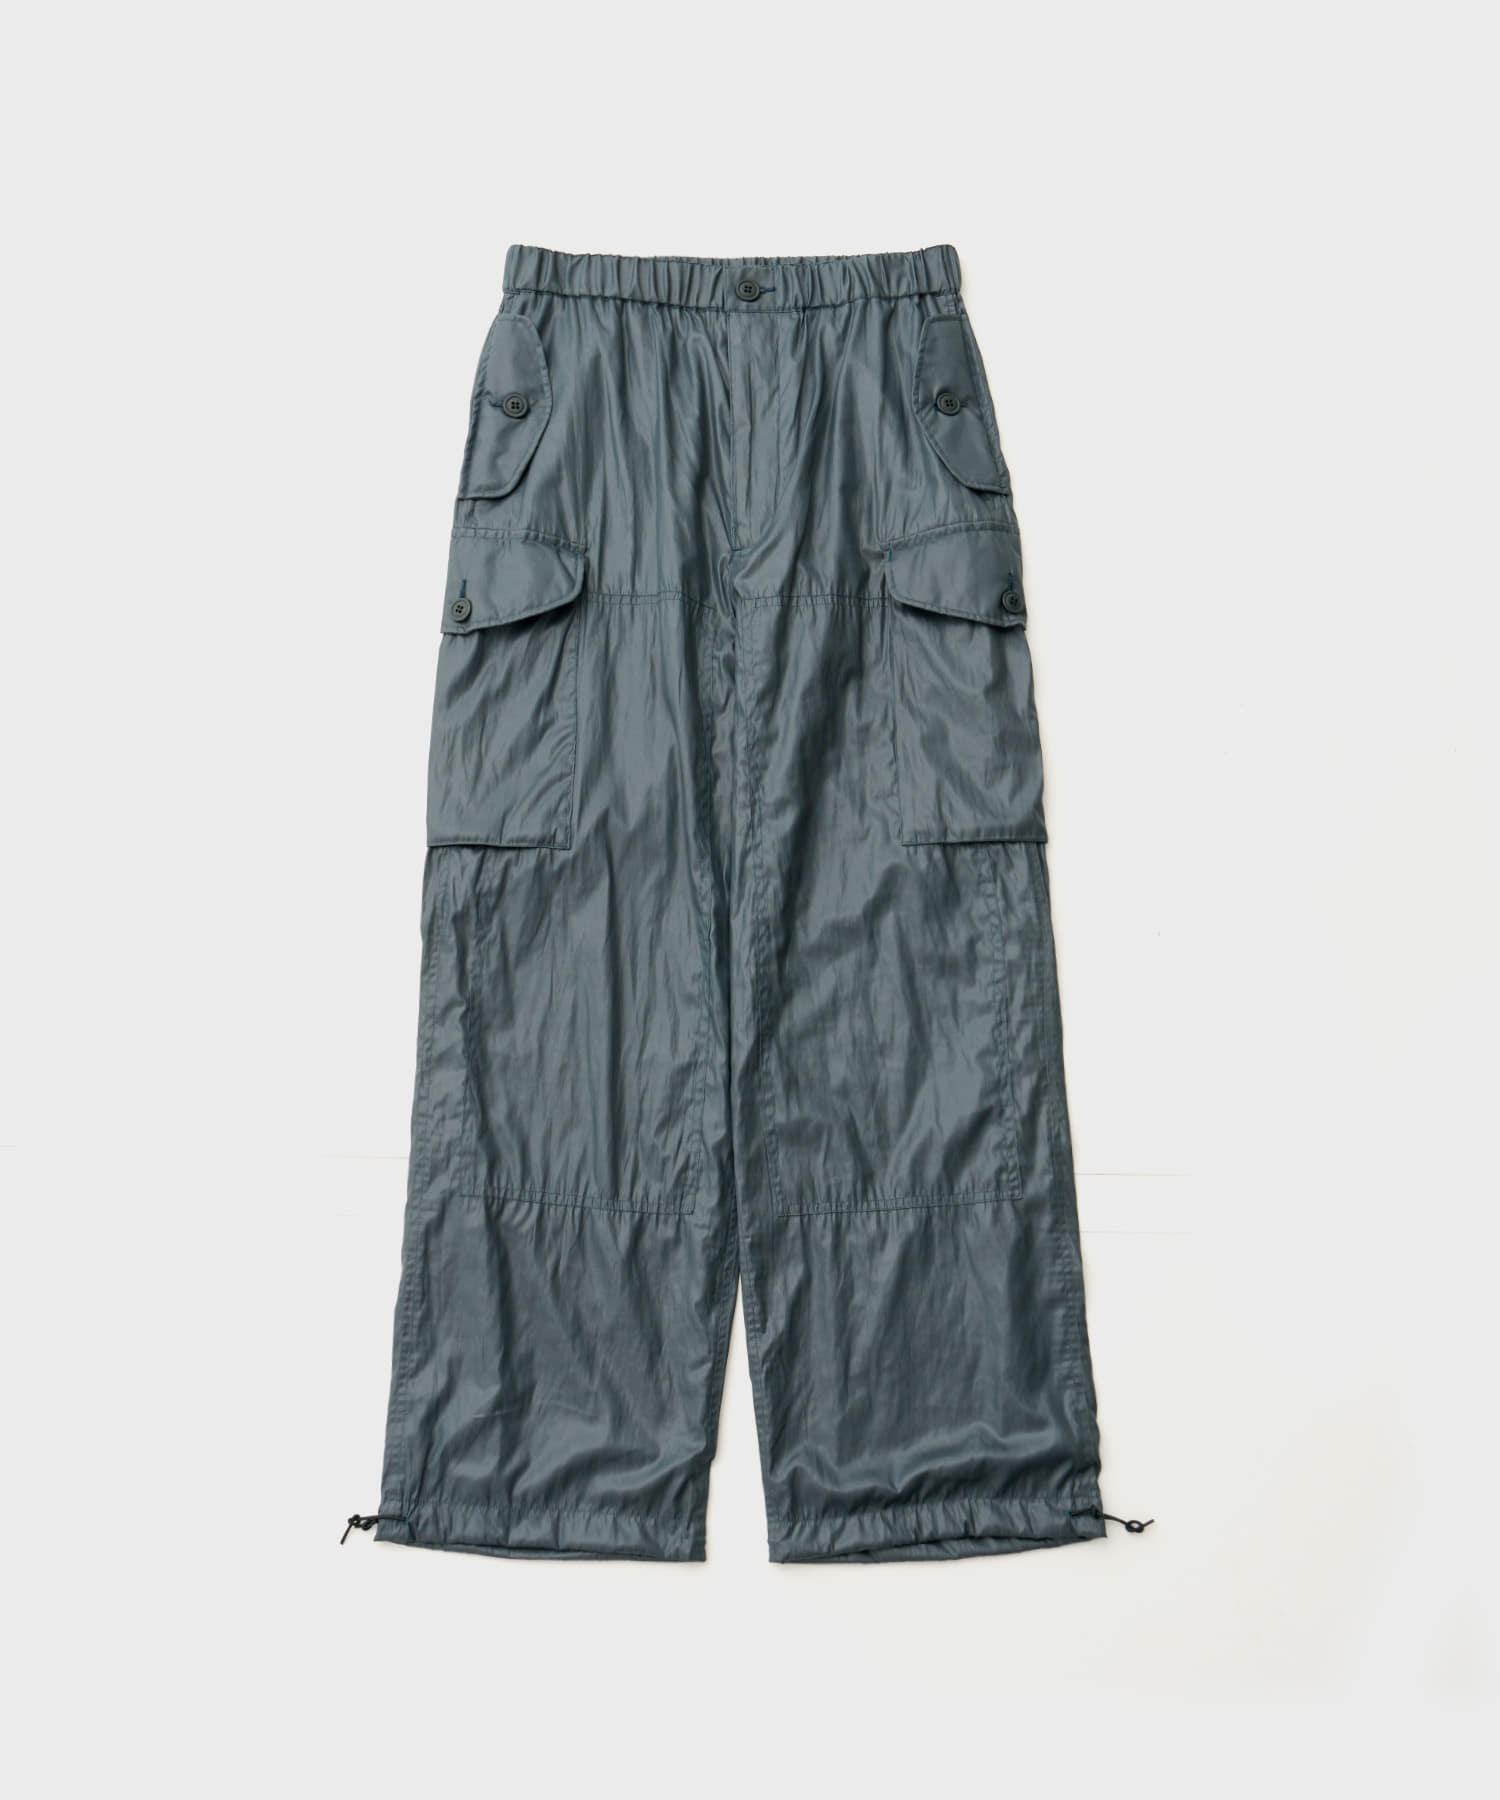 Leather Like Polyester Cargo Pants (Dusty Green)